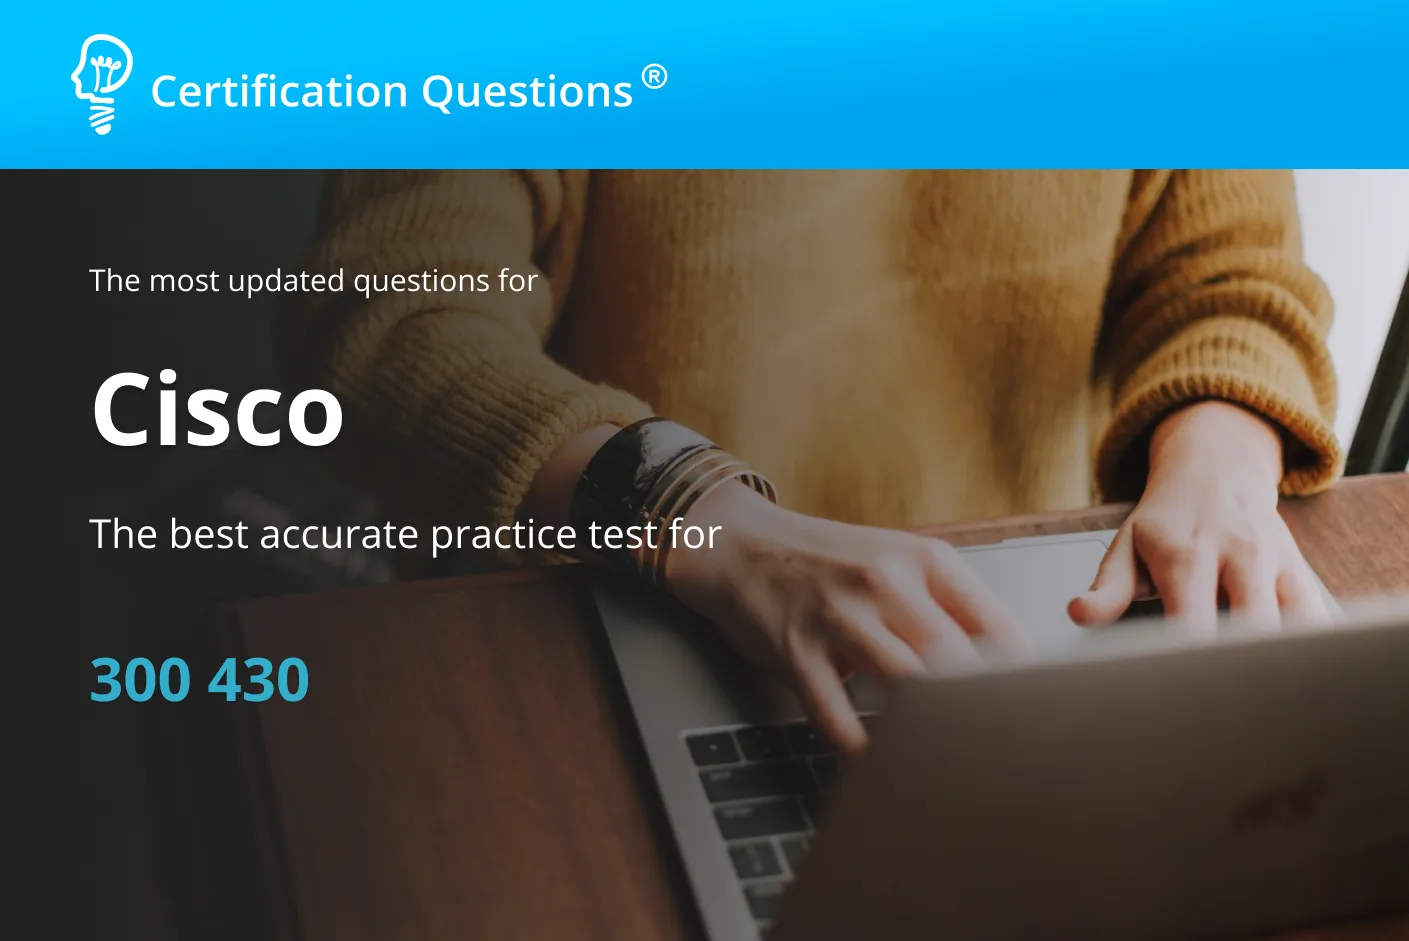 This image is related to Cisco 300 430 Practice Test